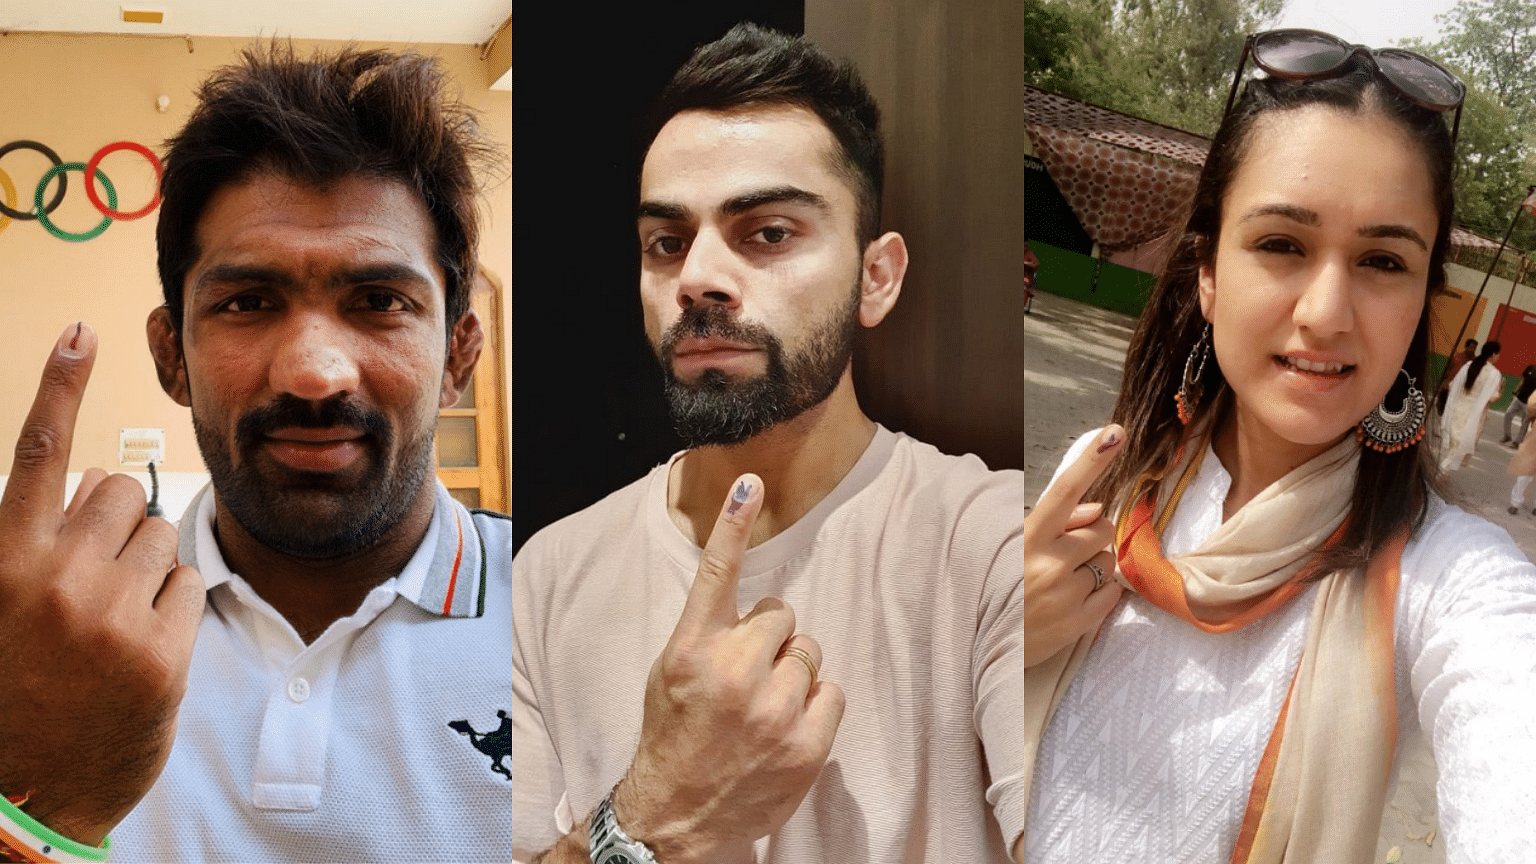 Sportspersons from varying backgrounds casted their votes on Sunday also urging others to step forward.